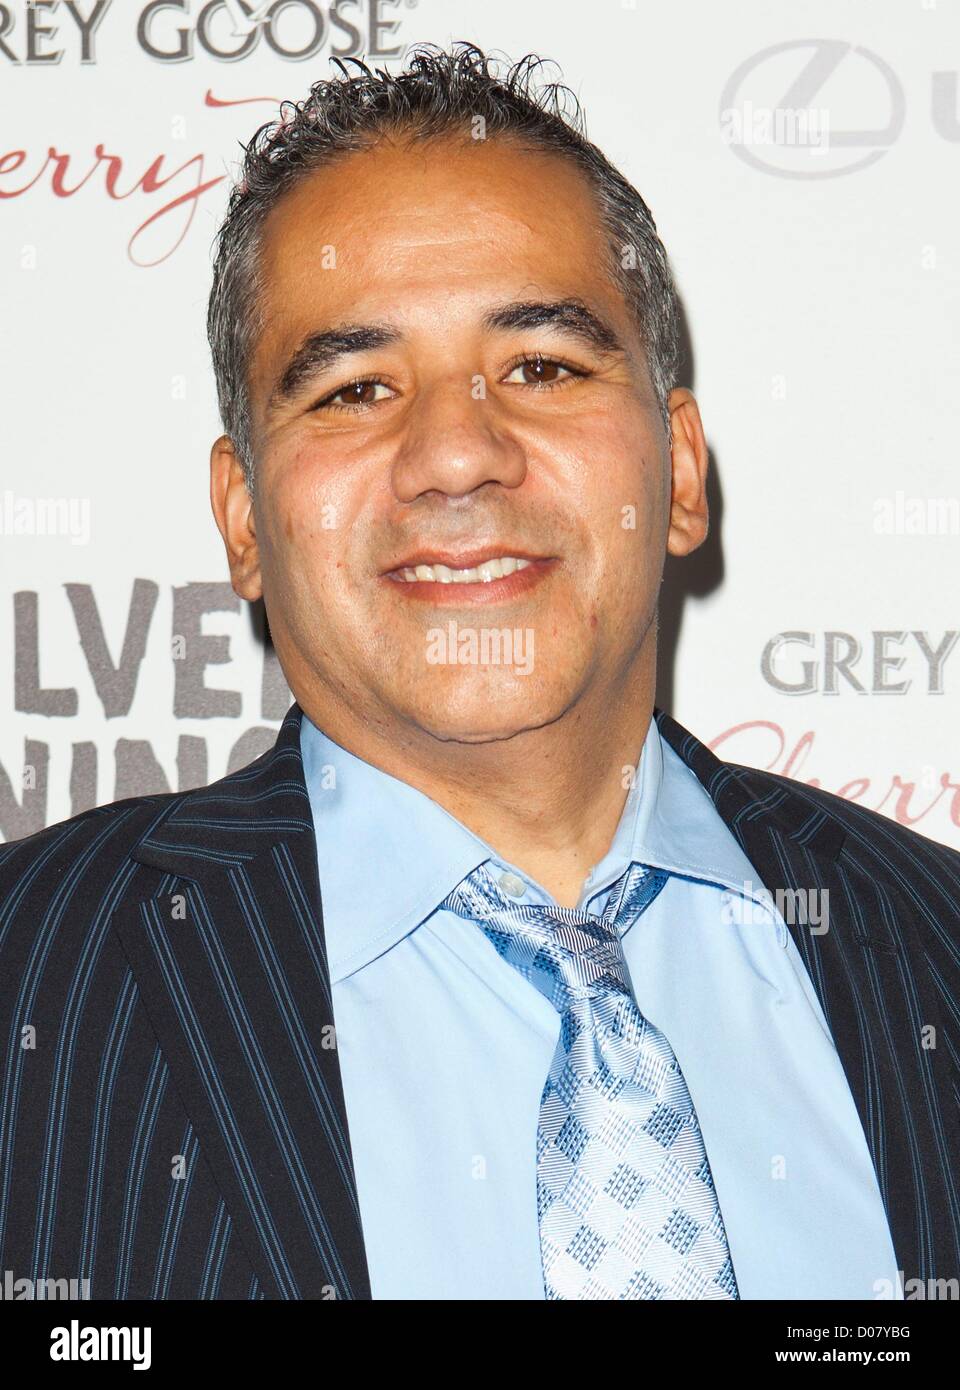 Los Angeles, USA. 19th November 2012. John Ortiz at arrivals for SILVER LININGS PLAYBOOK Premiere, The Academy of Motion Pictures Arts and Sciences  (AMPAS), Los Angeles, CA November 19, 2012. Photo By: Emiley Schweich/Everett Collection Stock Photo